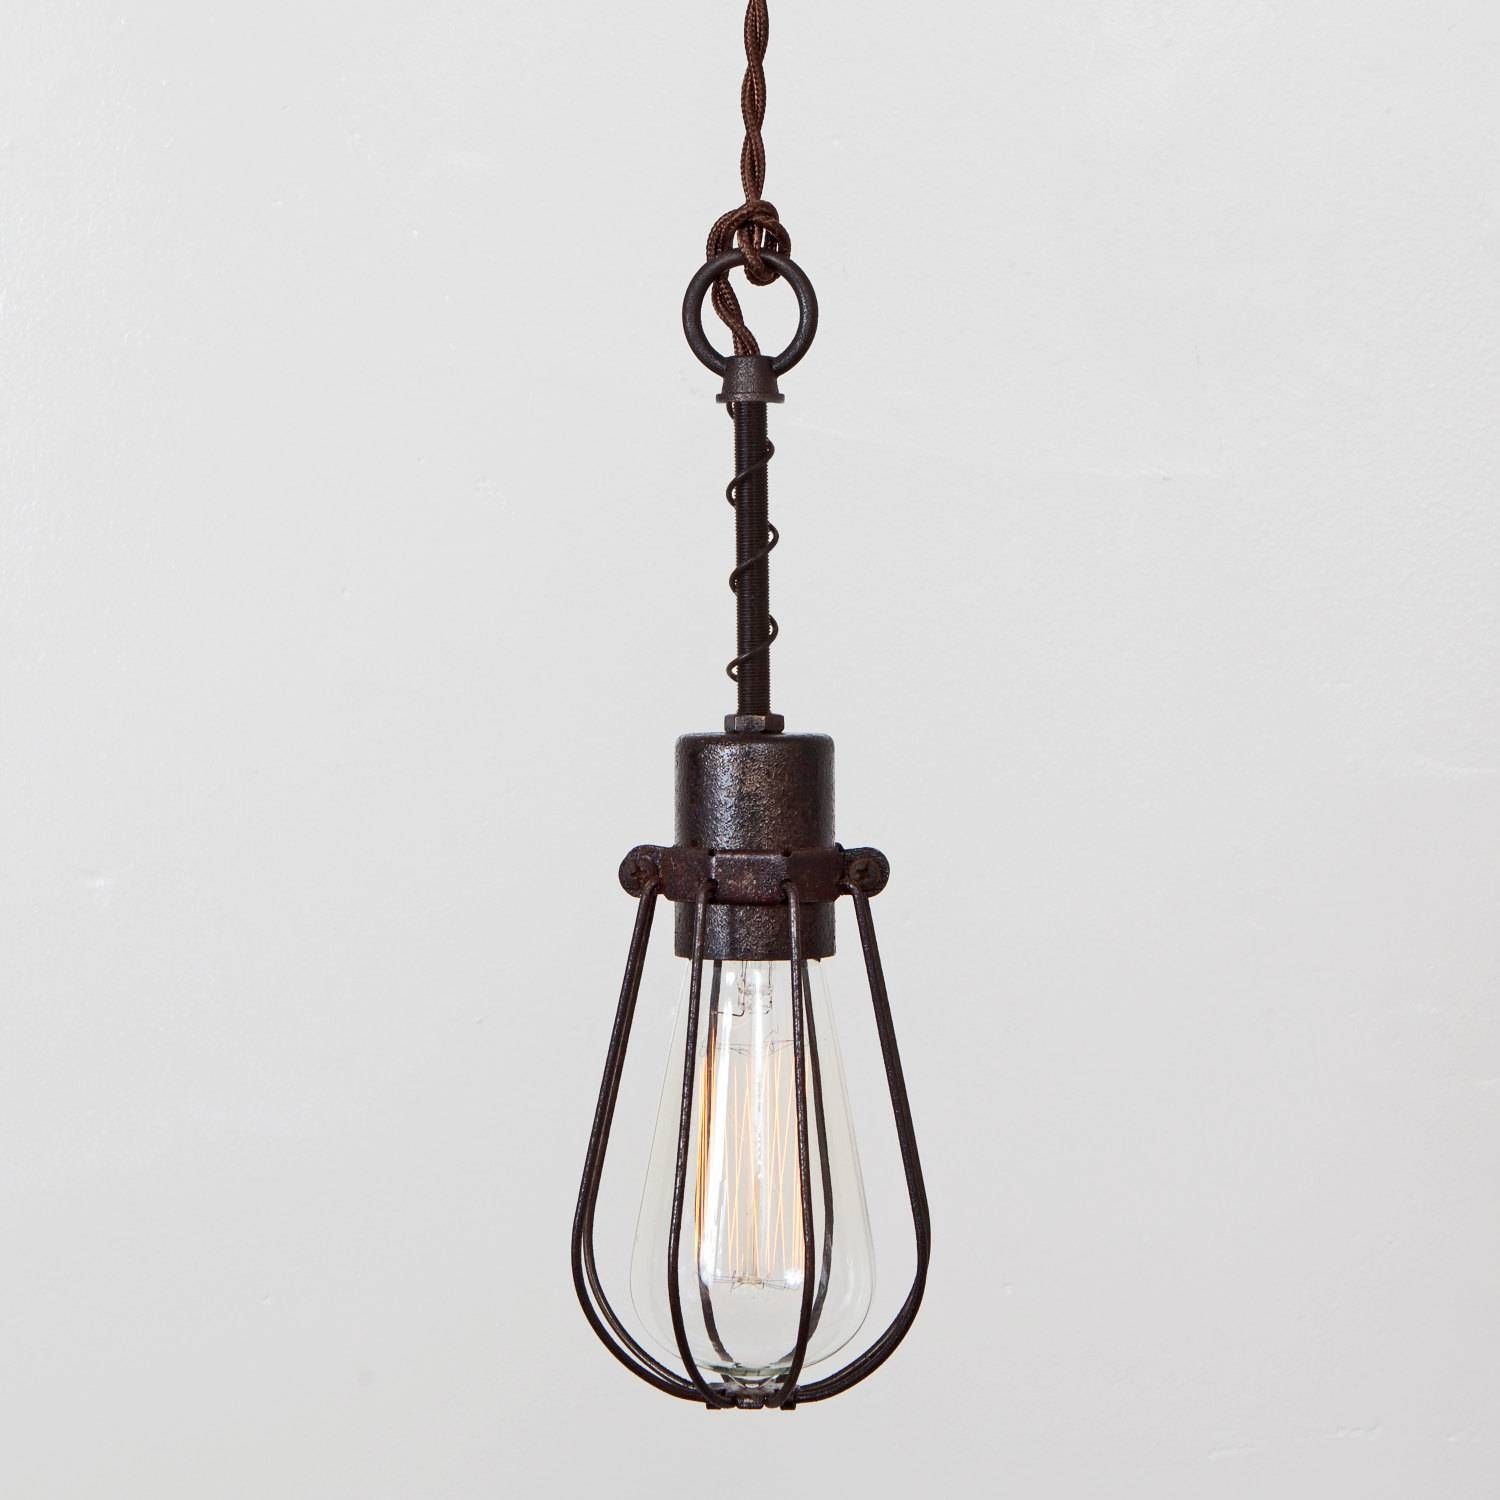 Lovely Plug In Pendant Lighting 20 About Remodel Black Flush Mount Throughout Plug In Pendant Lights (View 4 of 15)